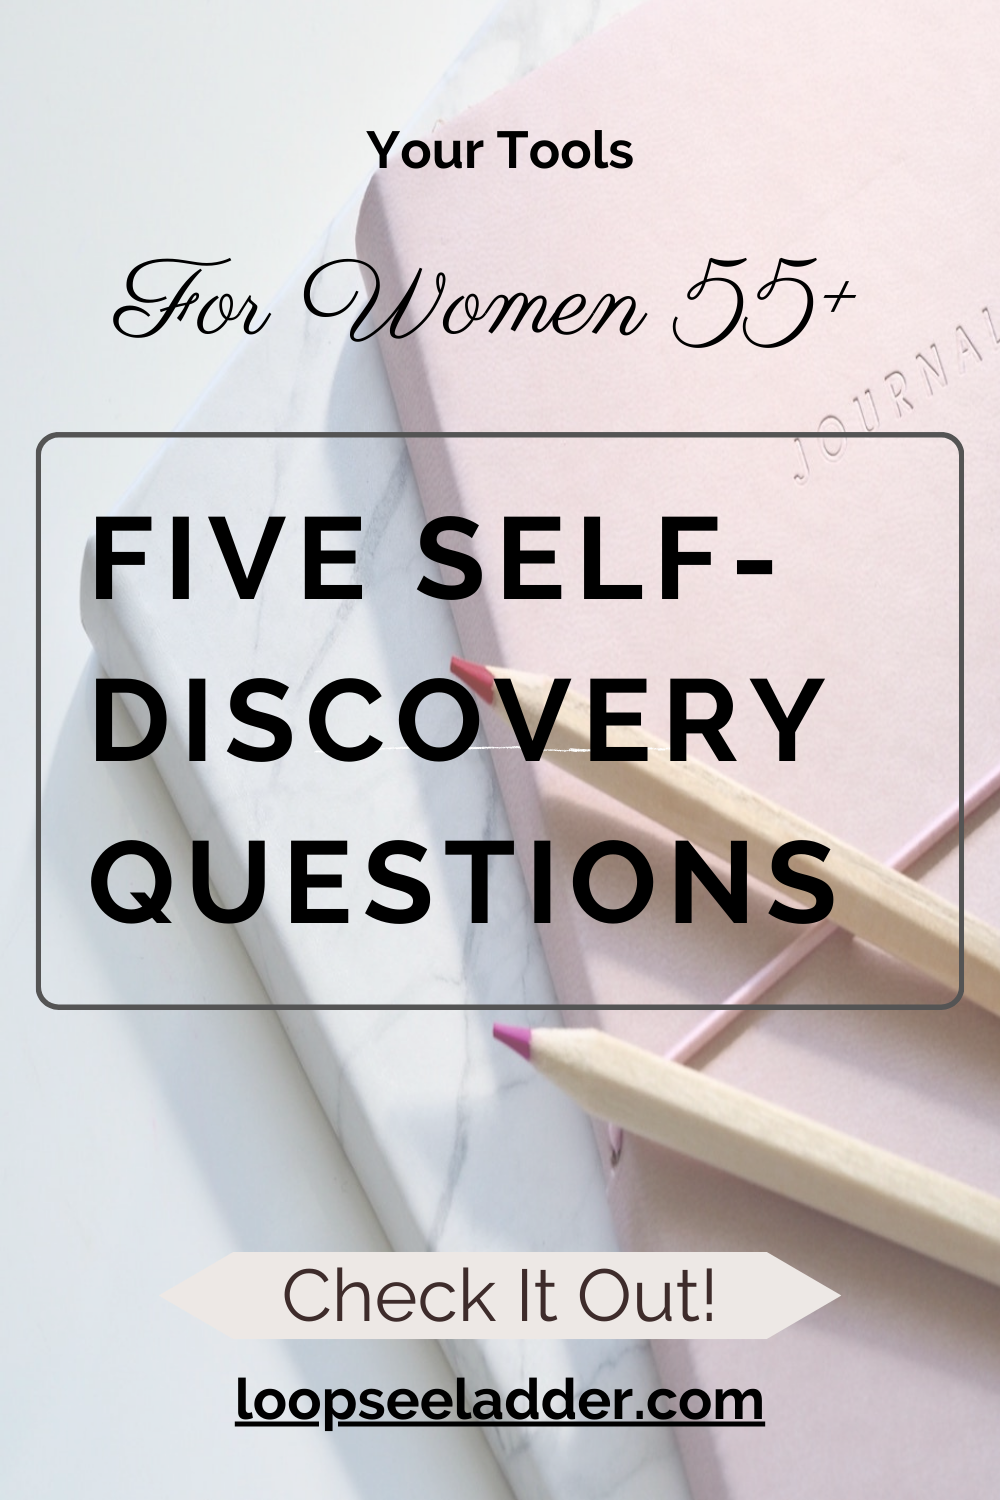 Why Women Over 55 Need to Ask Themselves These Self-Discovery Questions